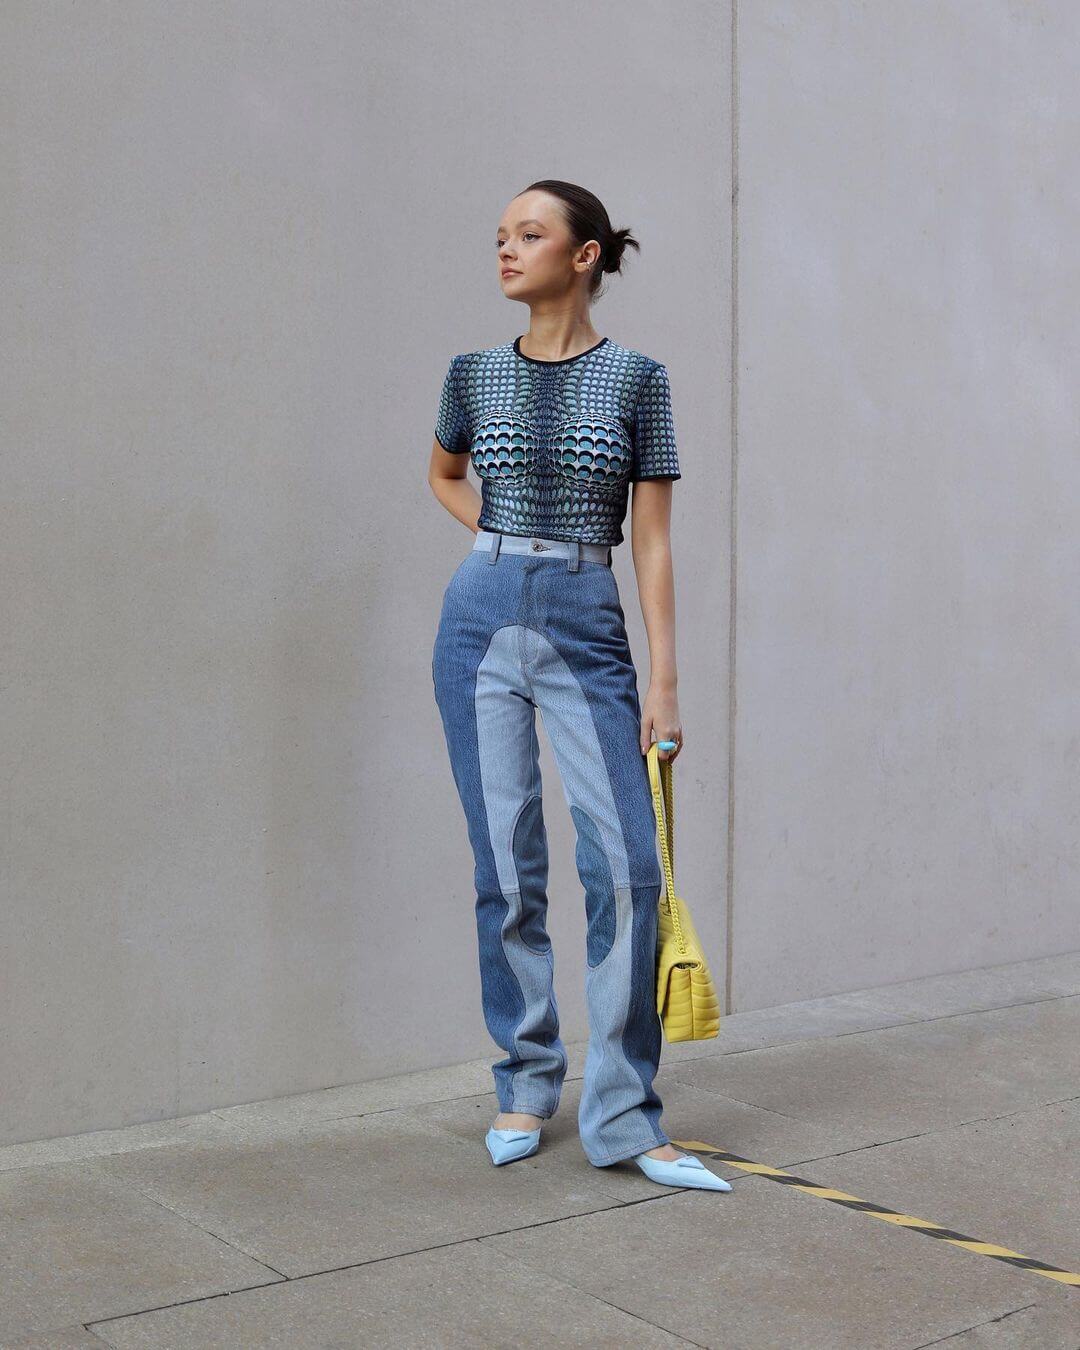 This Outfit Makes A Strong Case For Colorblock Jeans